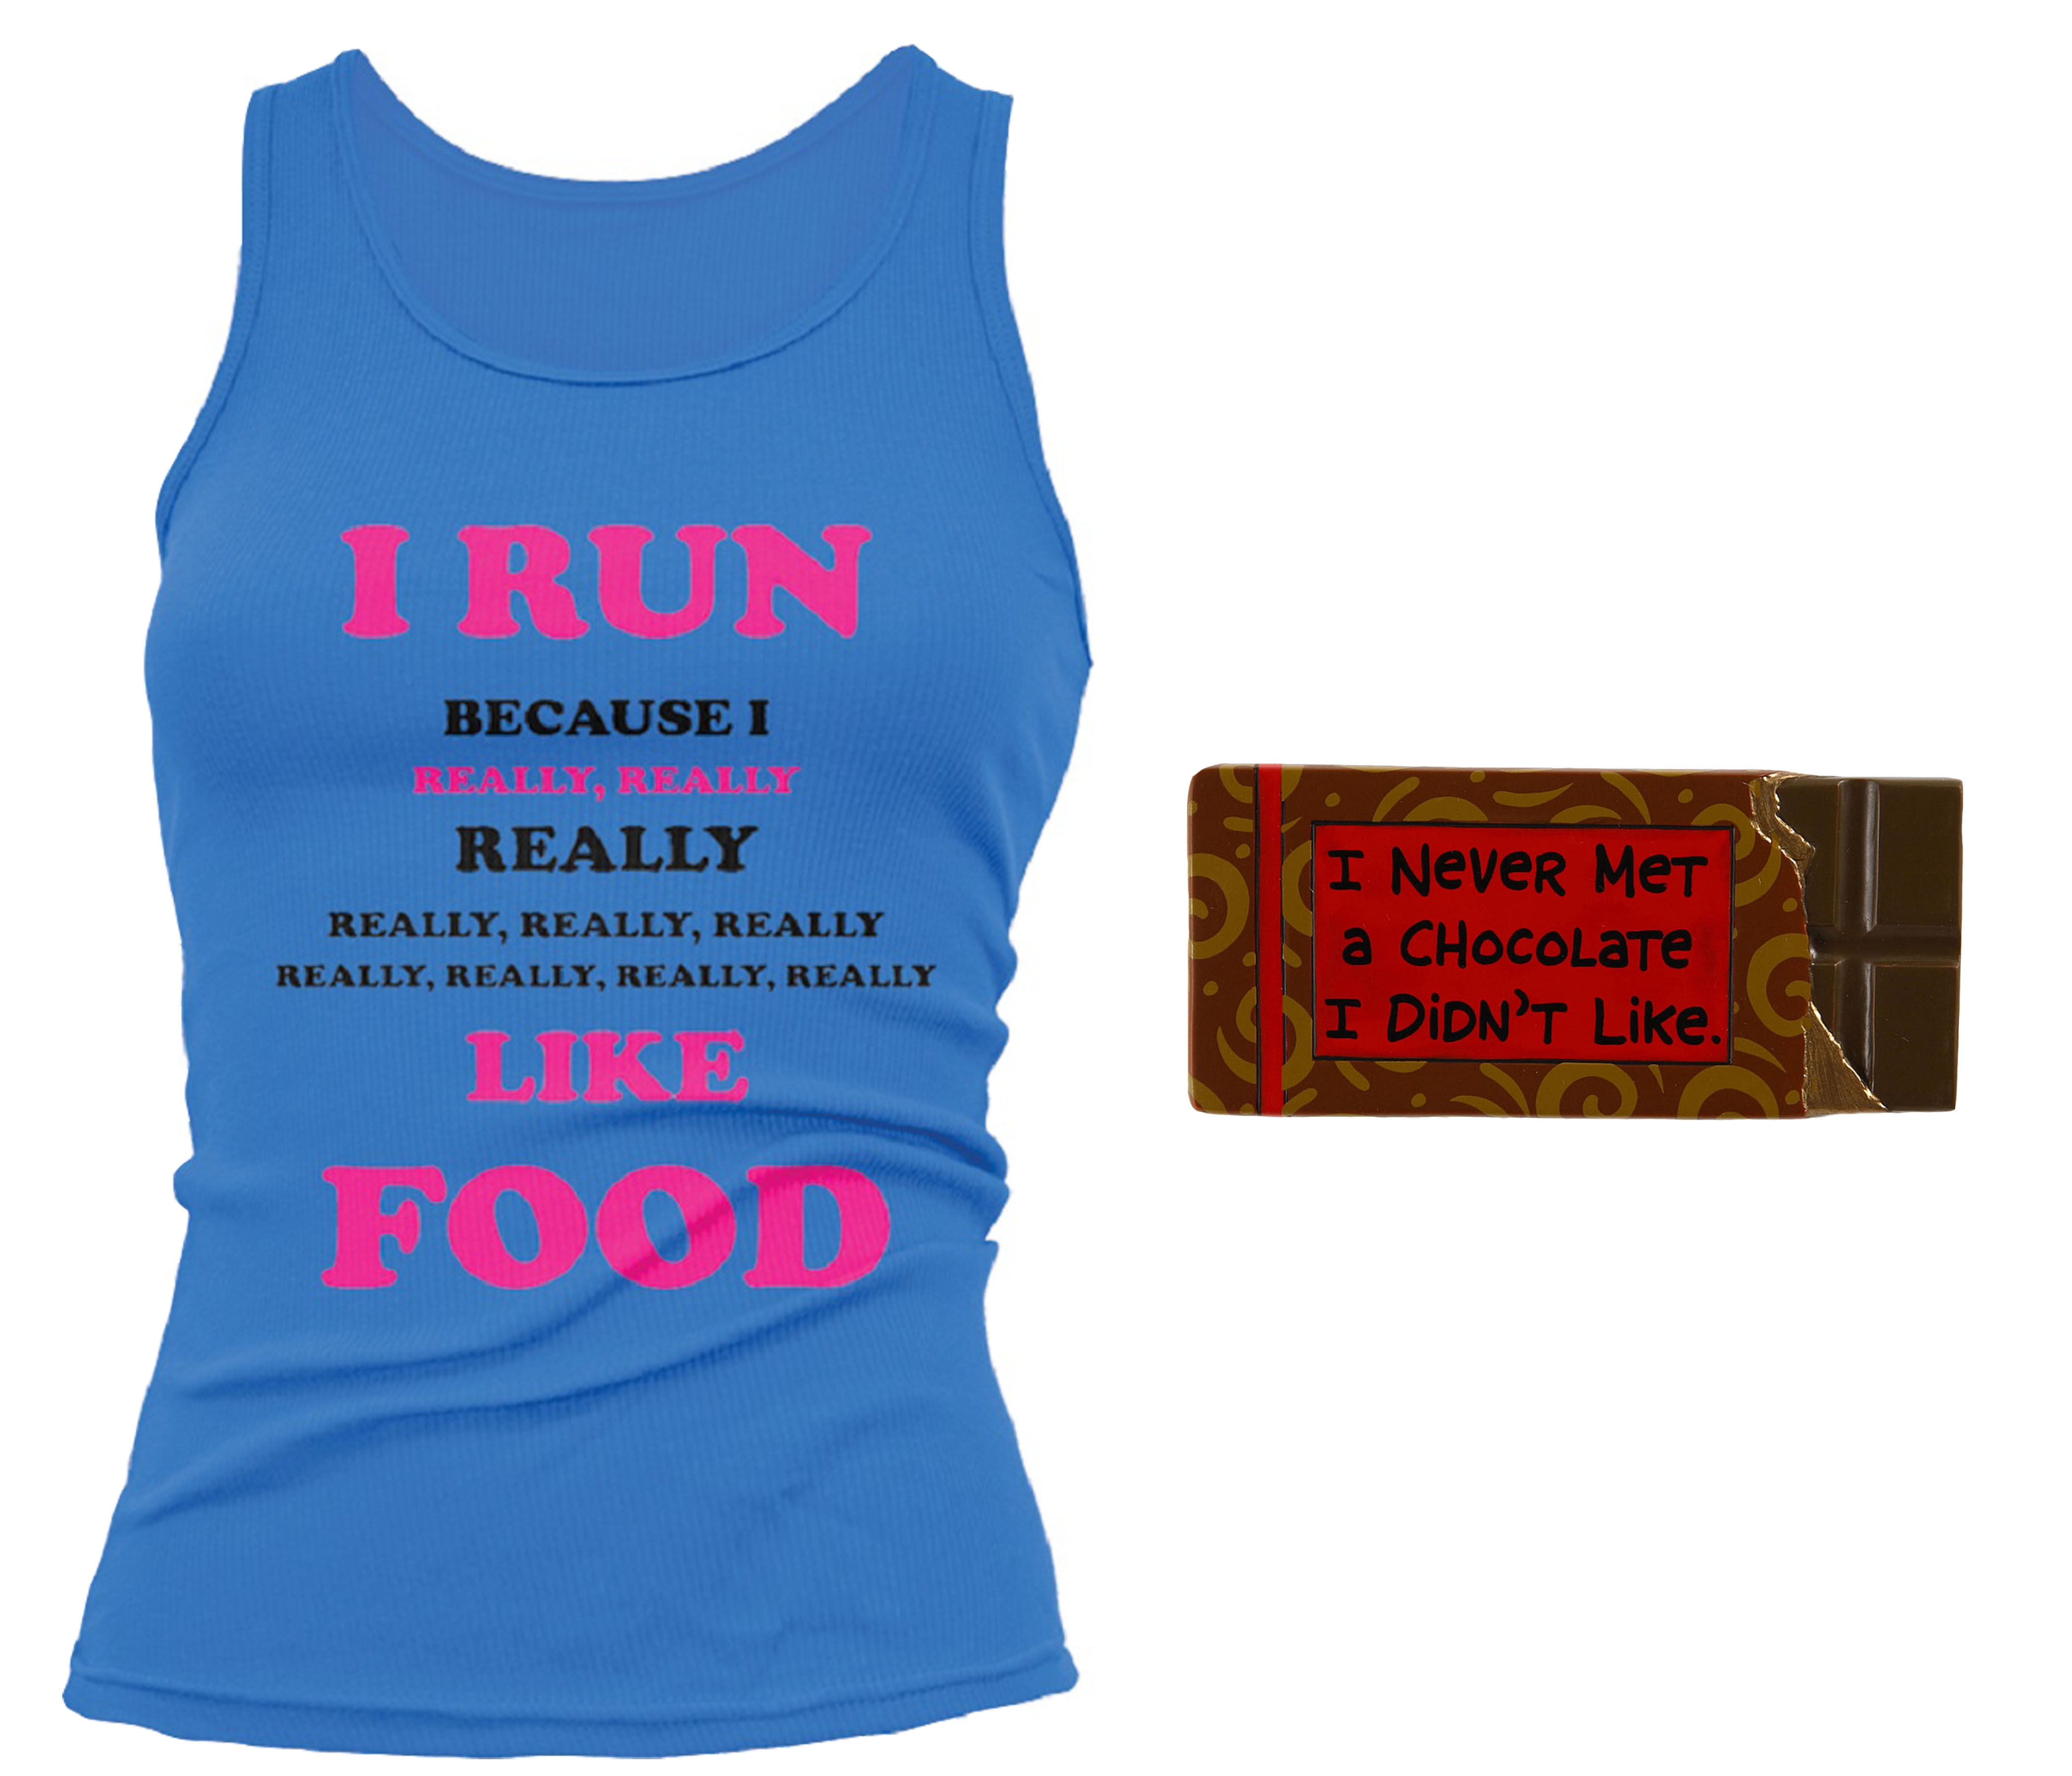 I Run Because I Really Like Food Women's Fitted Tank & Magnet Multi-pack, Funny  Running Shirt - FREE SHIPPING 